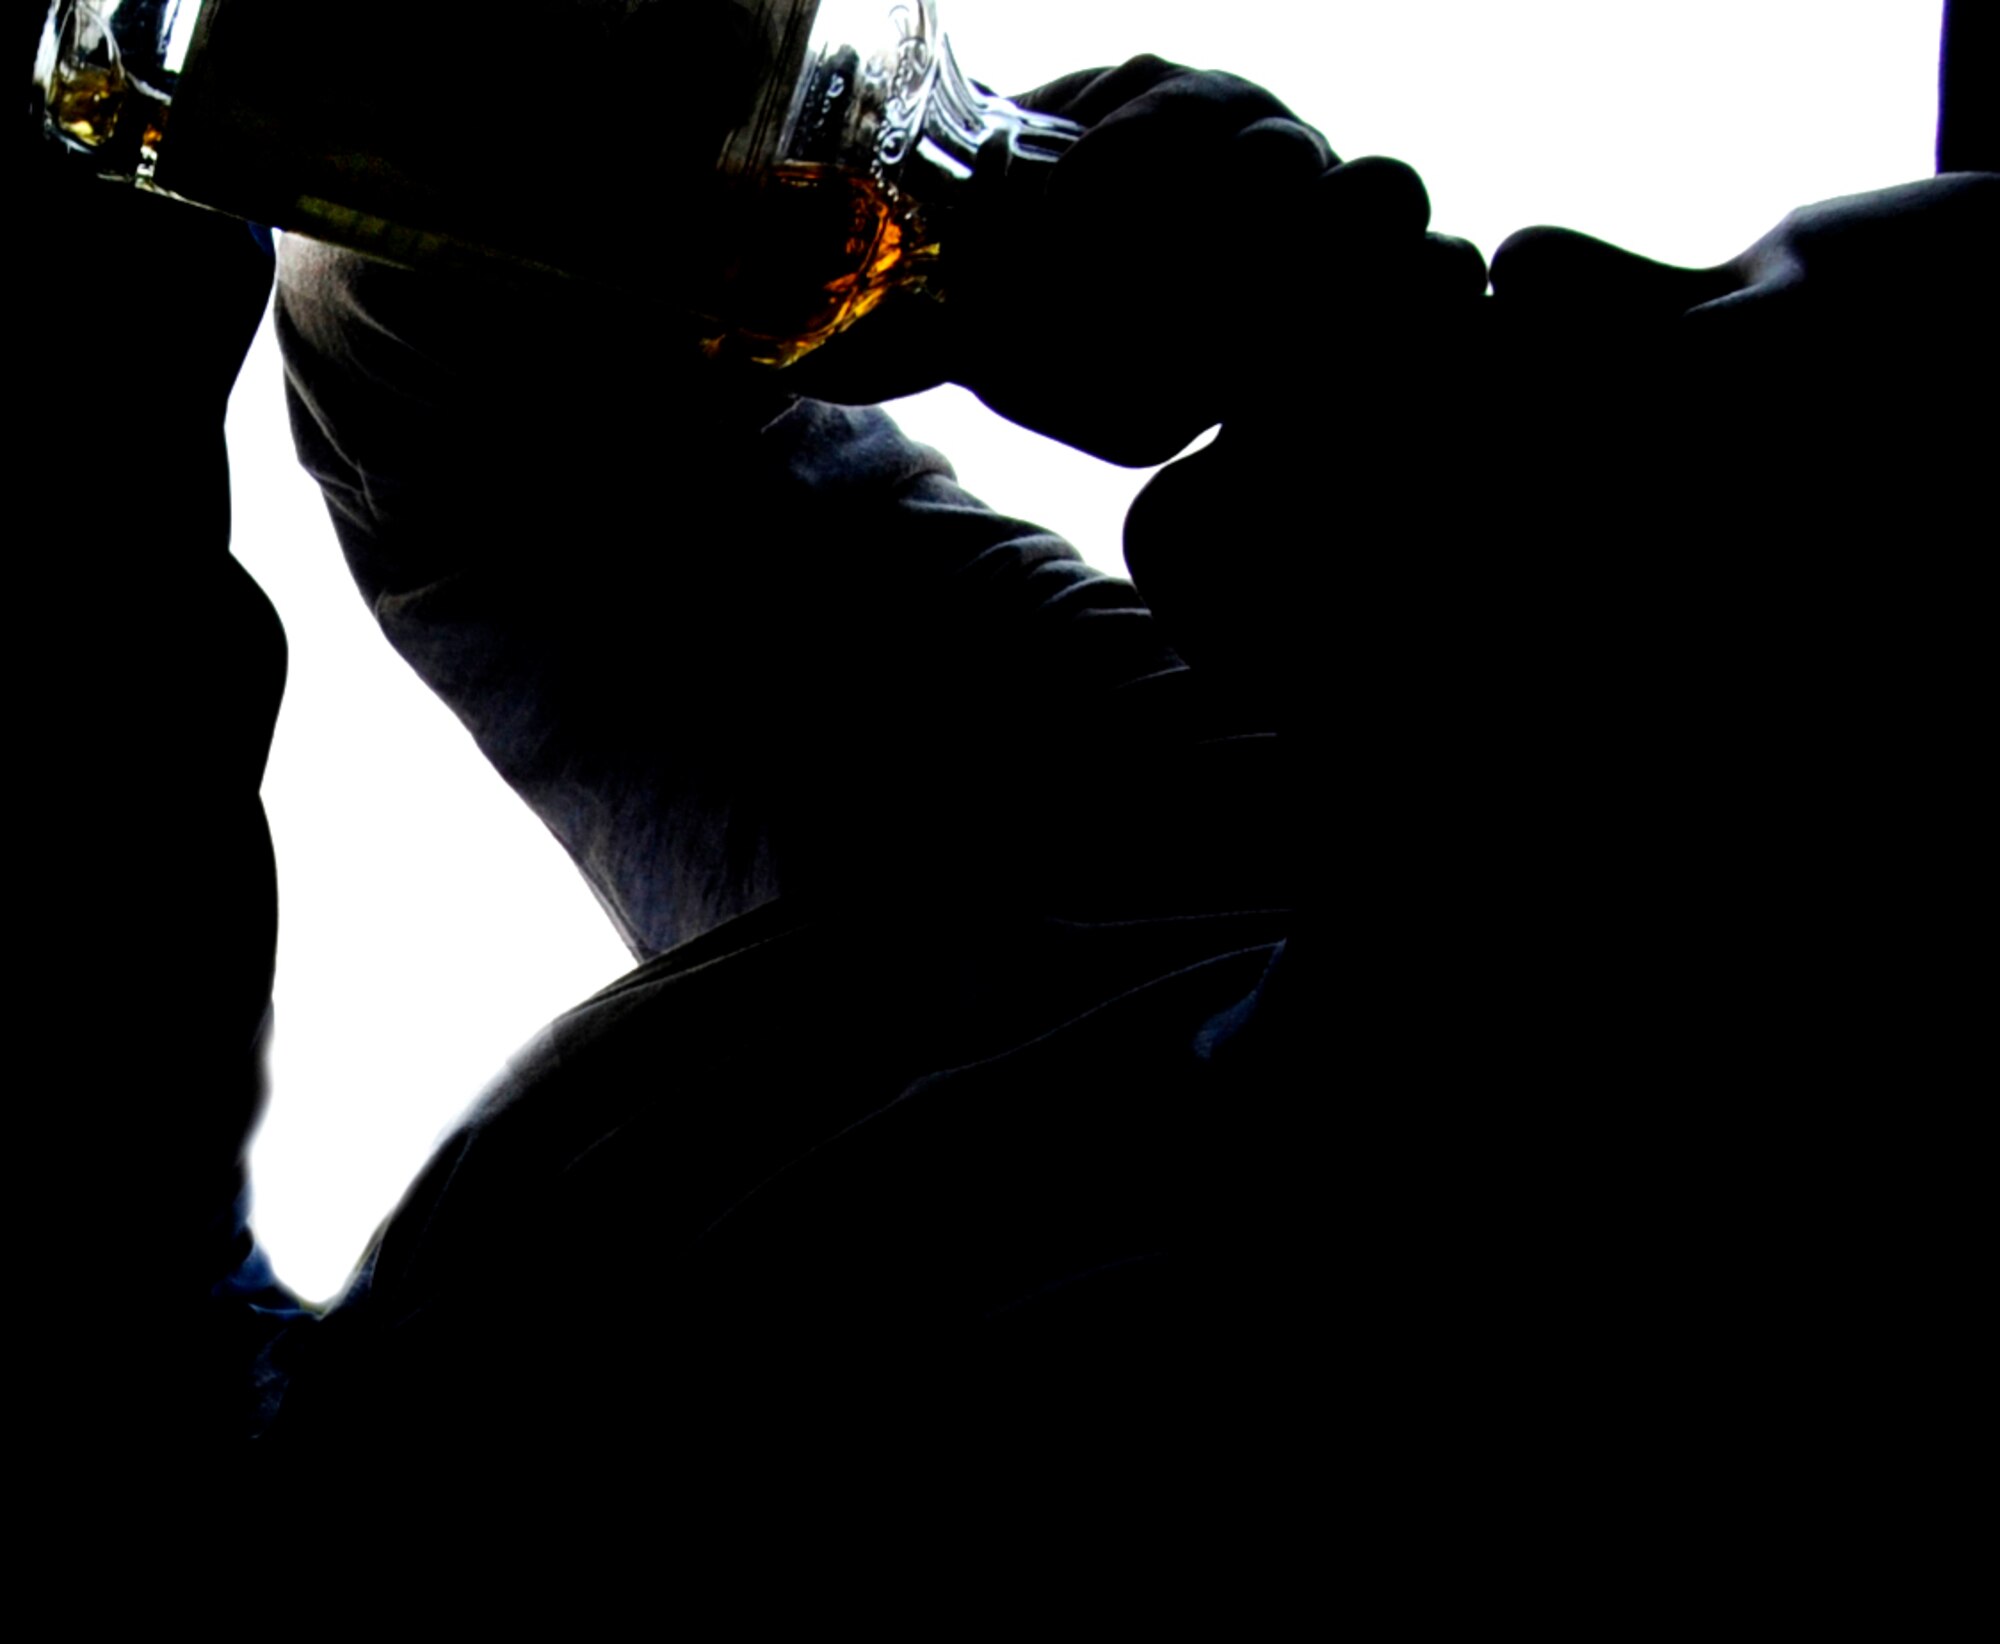 Binge drinking is the consumption of large amounts of alcohol in a very short period of time. According to the National Institute on Alcohol Abuse and Alcoholism, large amount of alcohol for females is approximately four or more drinks in a row. For males, around five or more drinks in a row equates to too much alcohol. Binge drinking leads to alcohol poisoning, which can be fatal. It becomes even more deadly when combined with medication or other drugs, illness, stress or an empty stomach. (U.S. Air Force photo by Airman 1st Class Kenna Jackson)